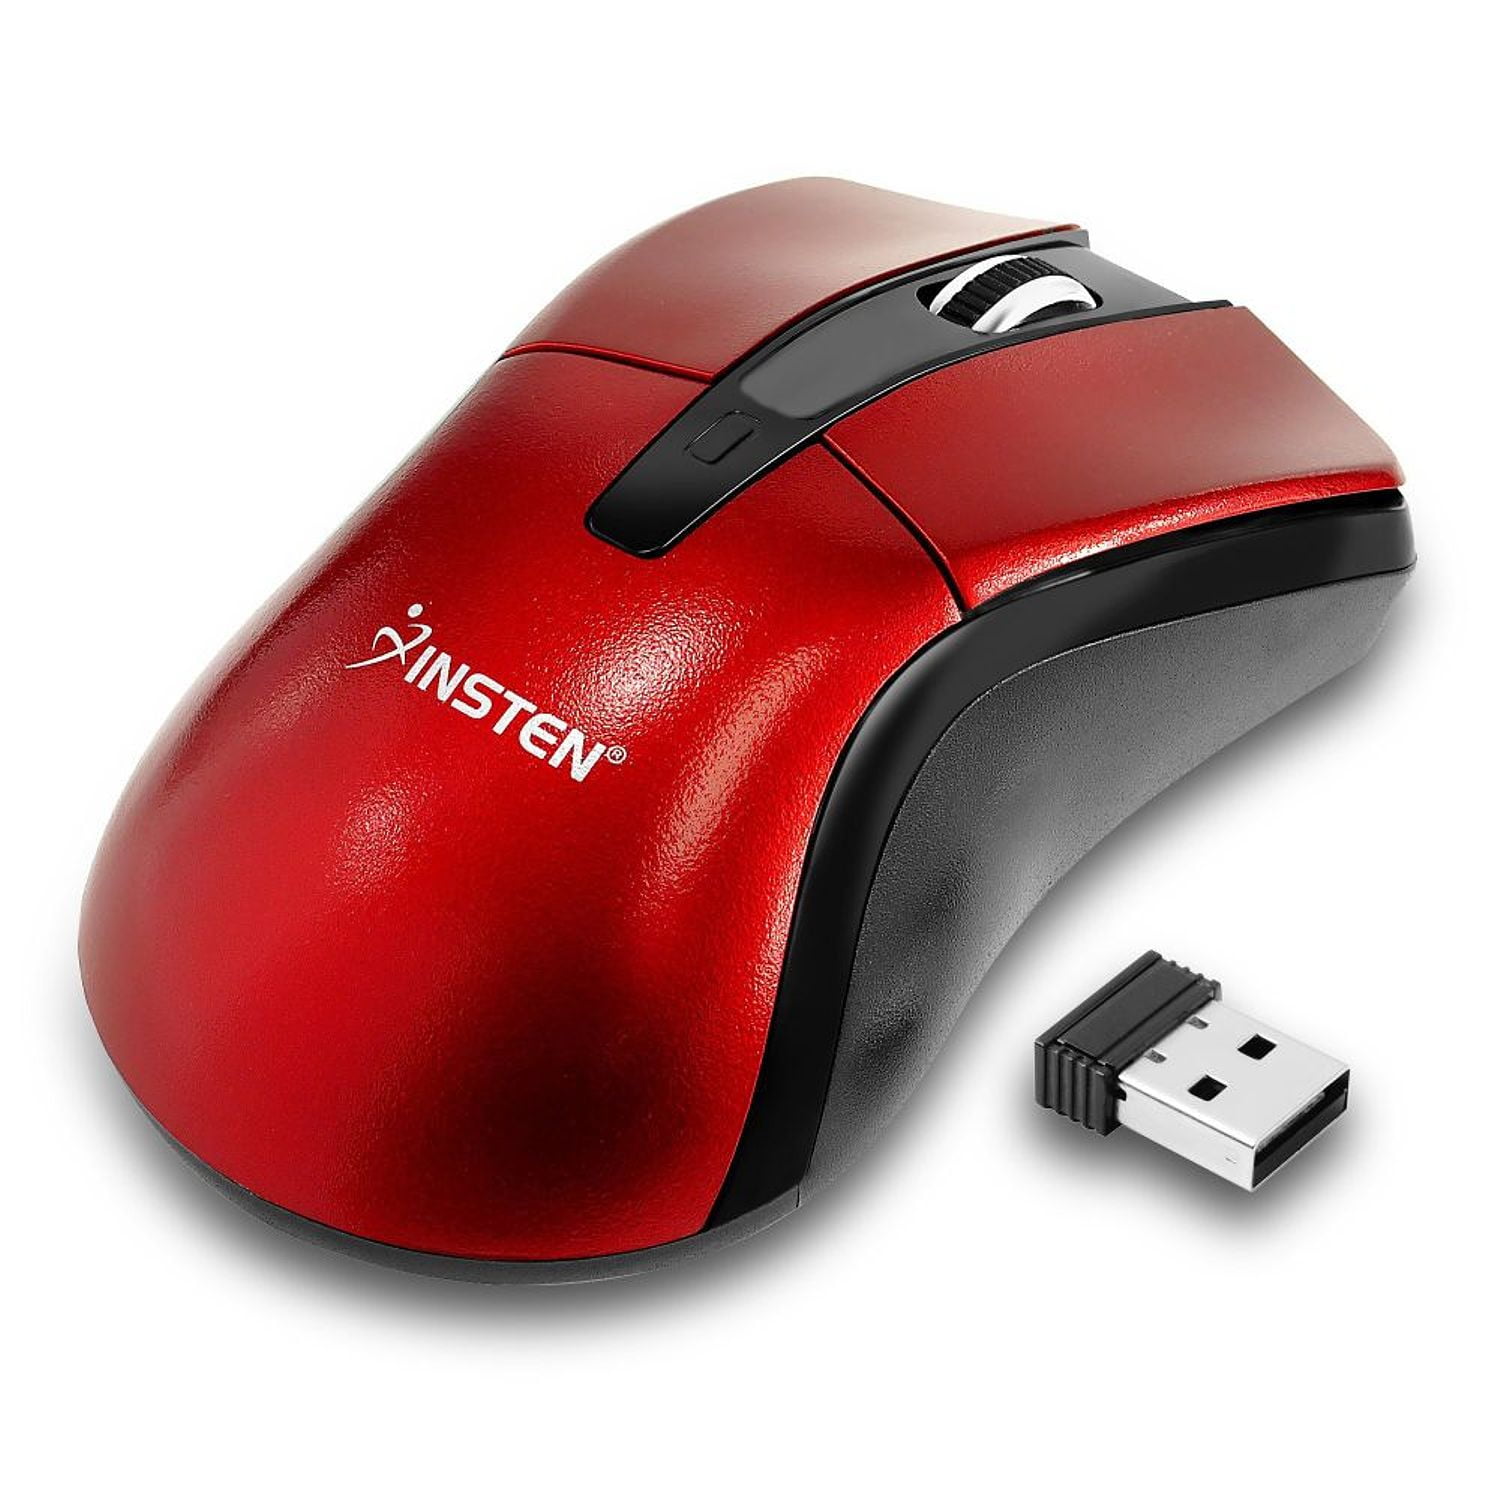 Insten 2.4G Cordless Wireless Optical Mouse